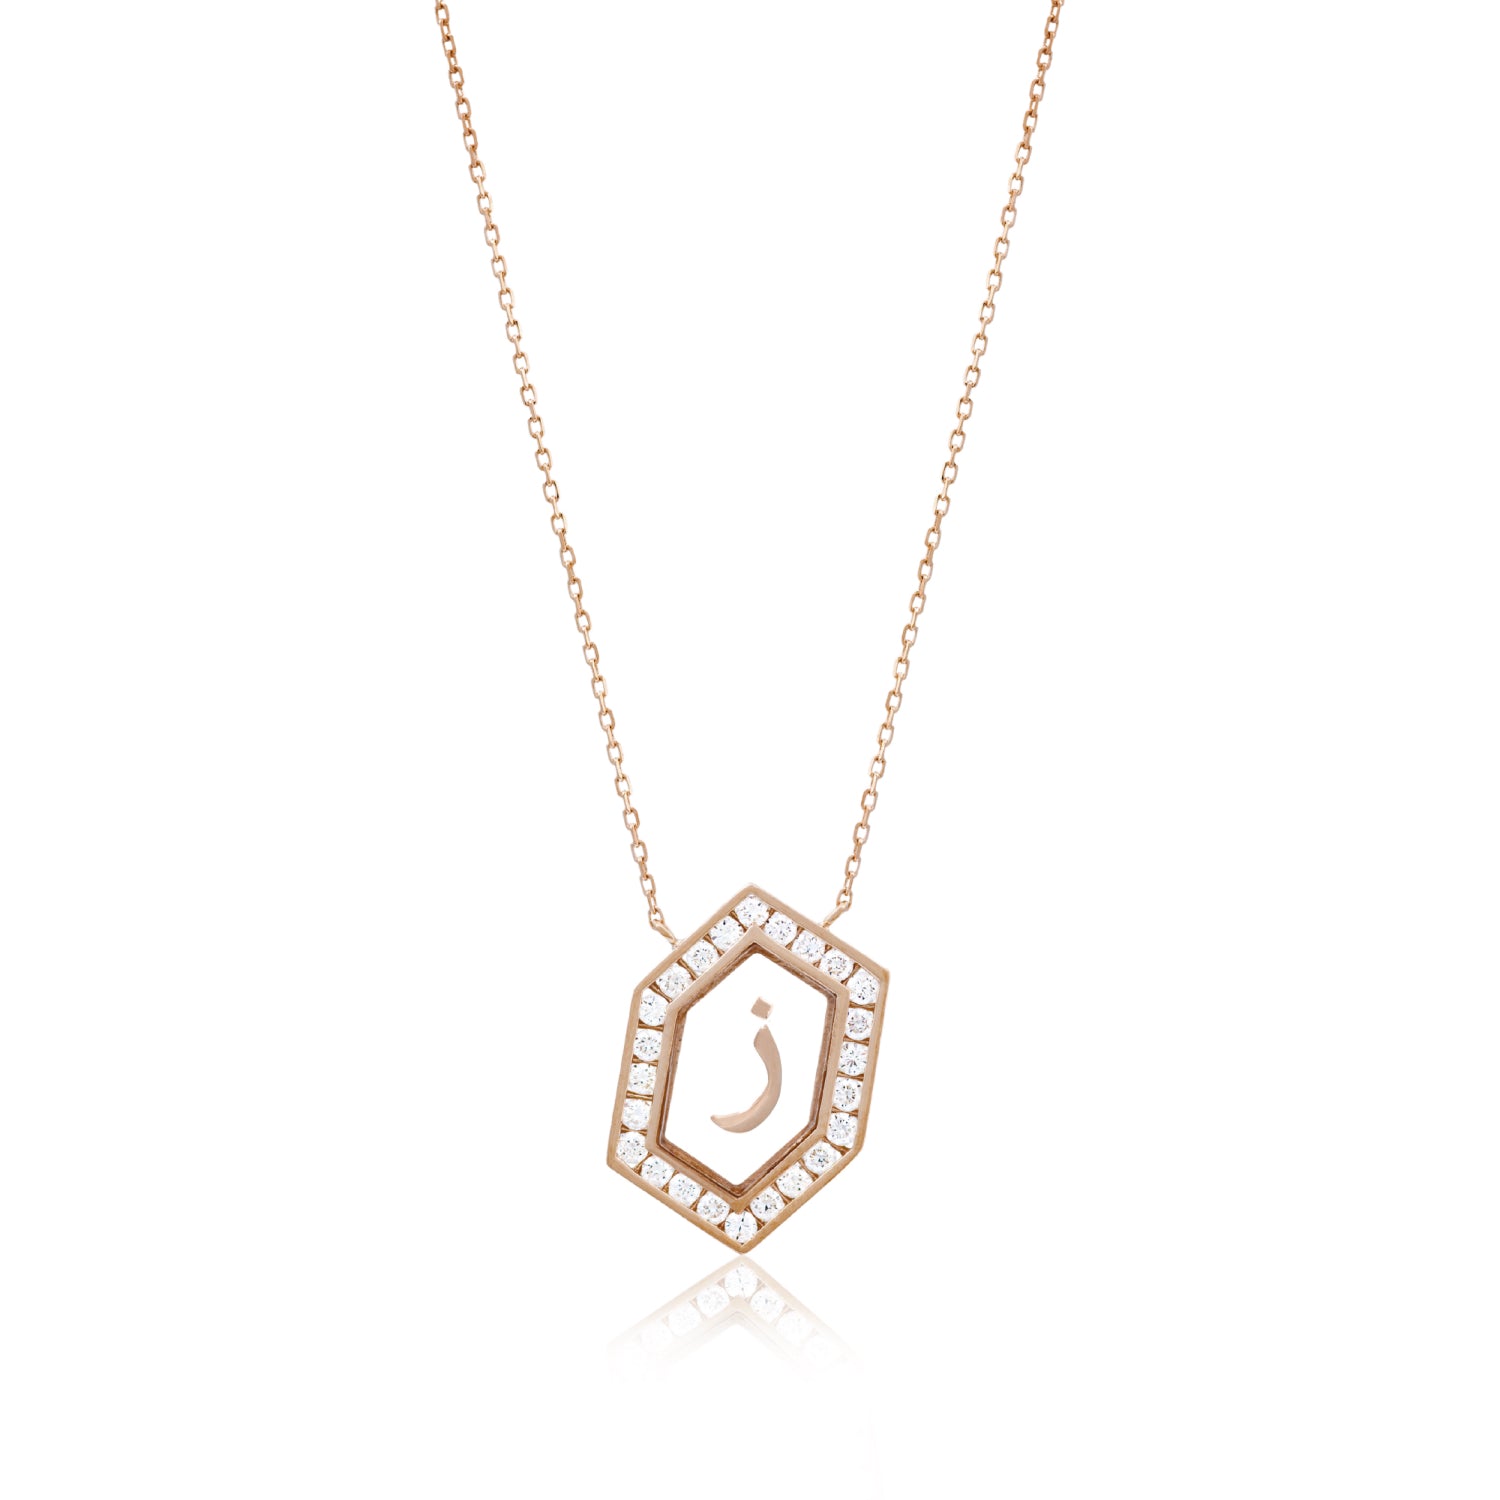 Qamoos 1.0 Letter ز Diamond Necklace in Rose Gold